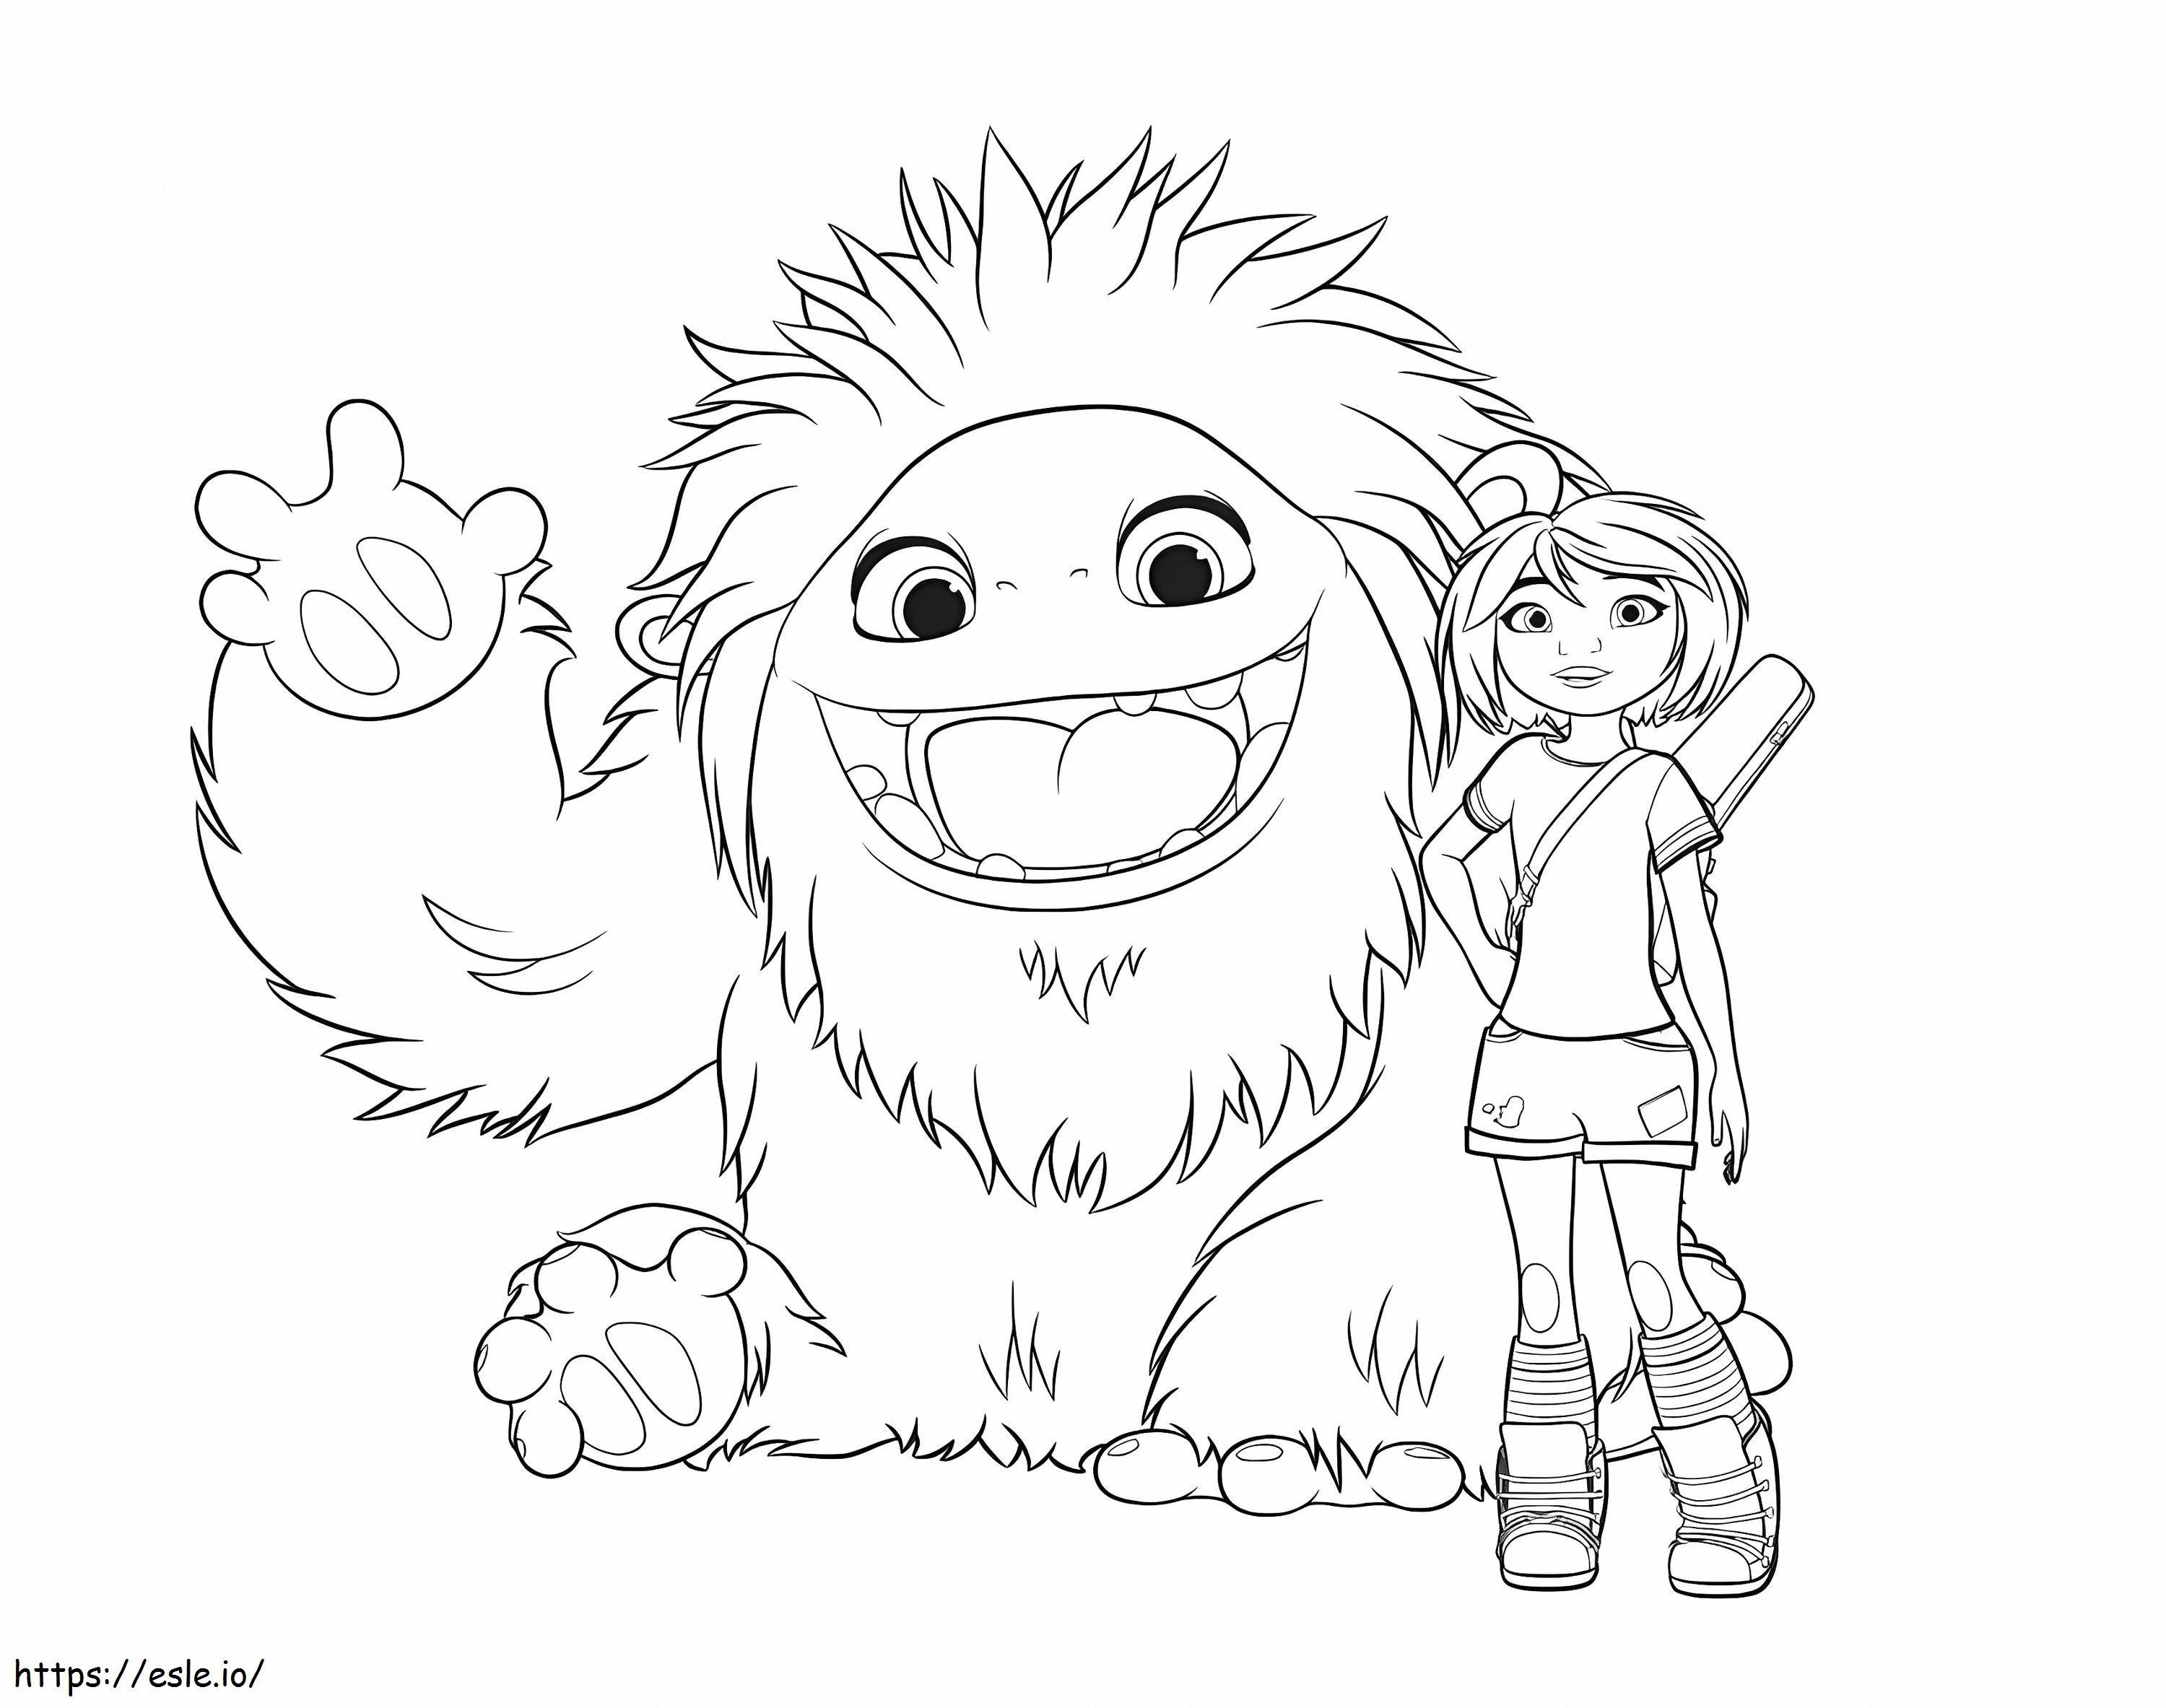 1591087040 Everest Yi E1574100563901 coloring page